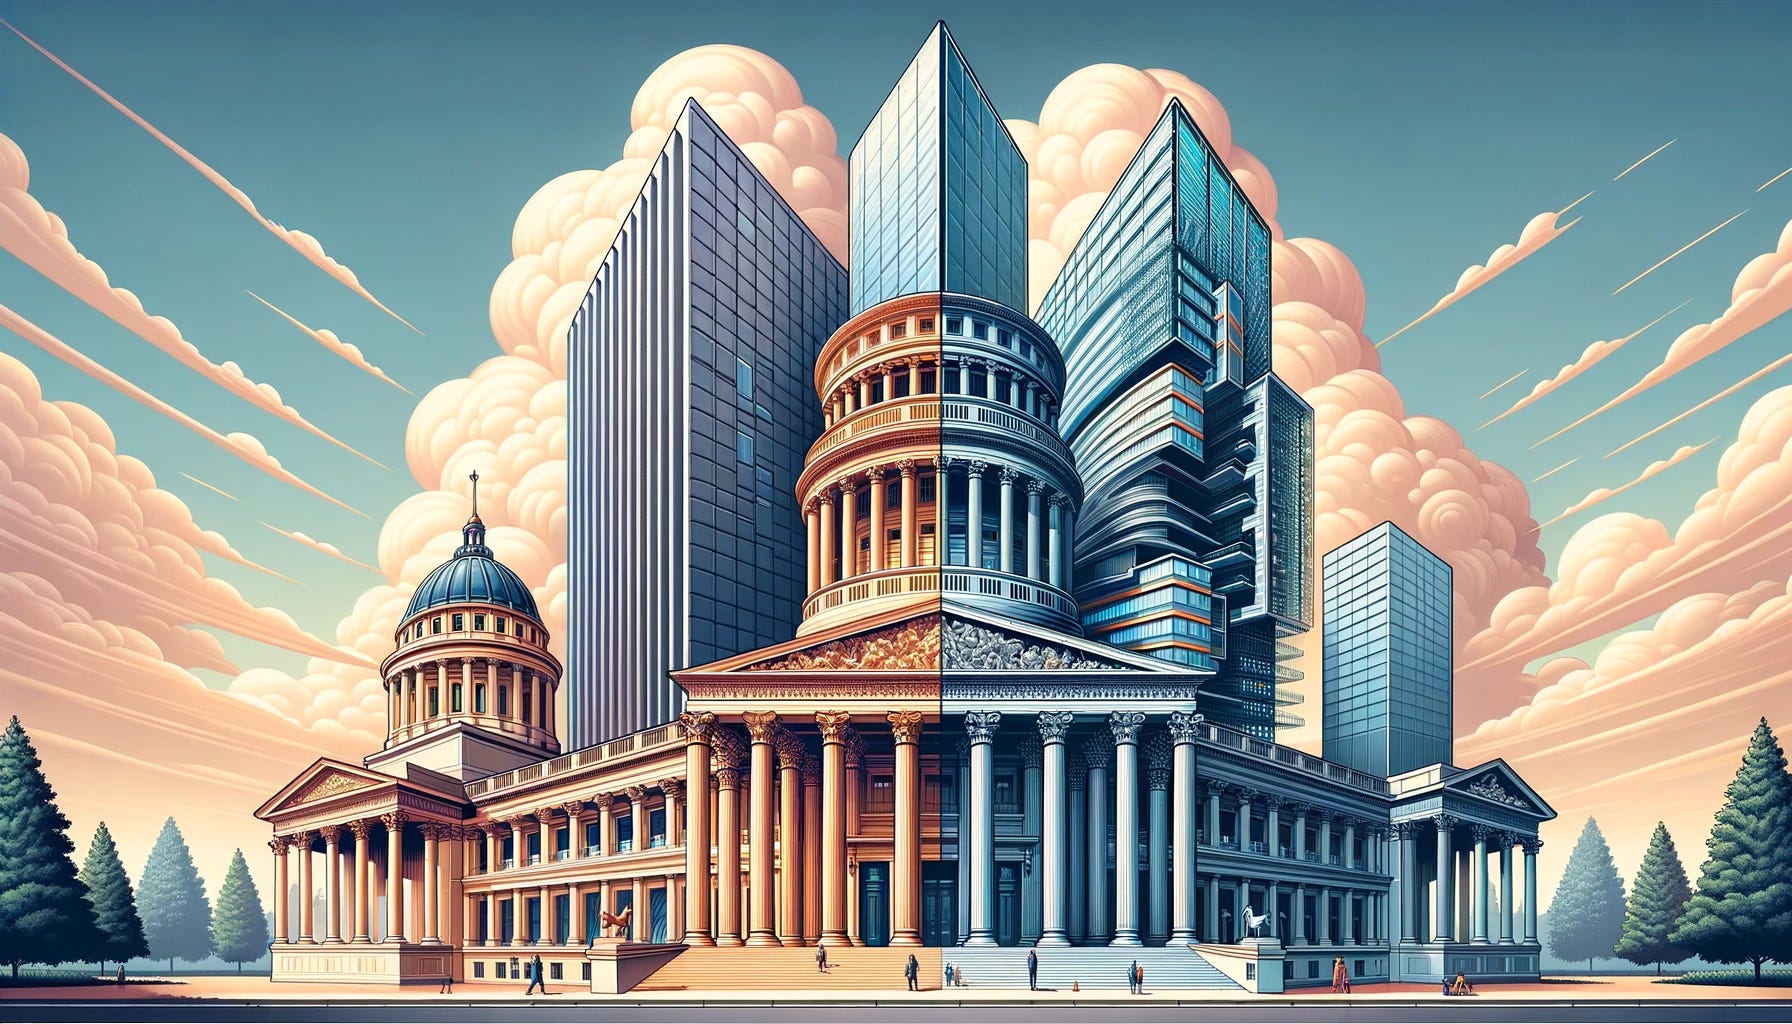 Modern style illustration in a 16:9 aspect ratio divided into three distinct panels: Panel 1 (left) showcases a majestic classicism building with columns, domes, and ornate facades, symbolizing traditional data structures. Panel 3 (right) features a sleek, towering modern skyscraper made of glass and steel, representing contemporary data formats. Panel 2 (center) presents a unique architectural fusion, visualizing a 'classical skyscraper' that combines elements of both classicism and modern design, with classical columns at the base transitioning to a modern glass and steel structure as it rises. This central hybrid building epitomizes the 'join' operation, illustrating the innovative integration of old and new data structures in Google Cloud Spanner.